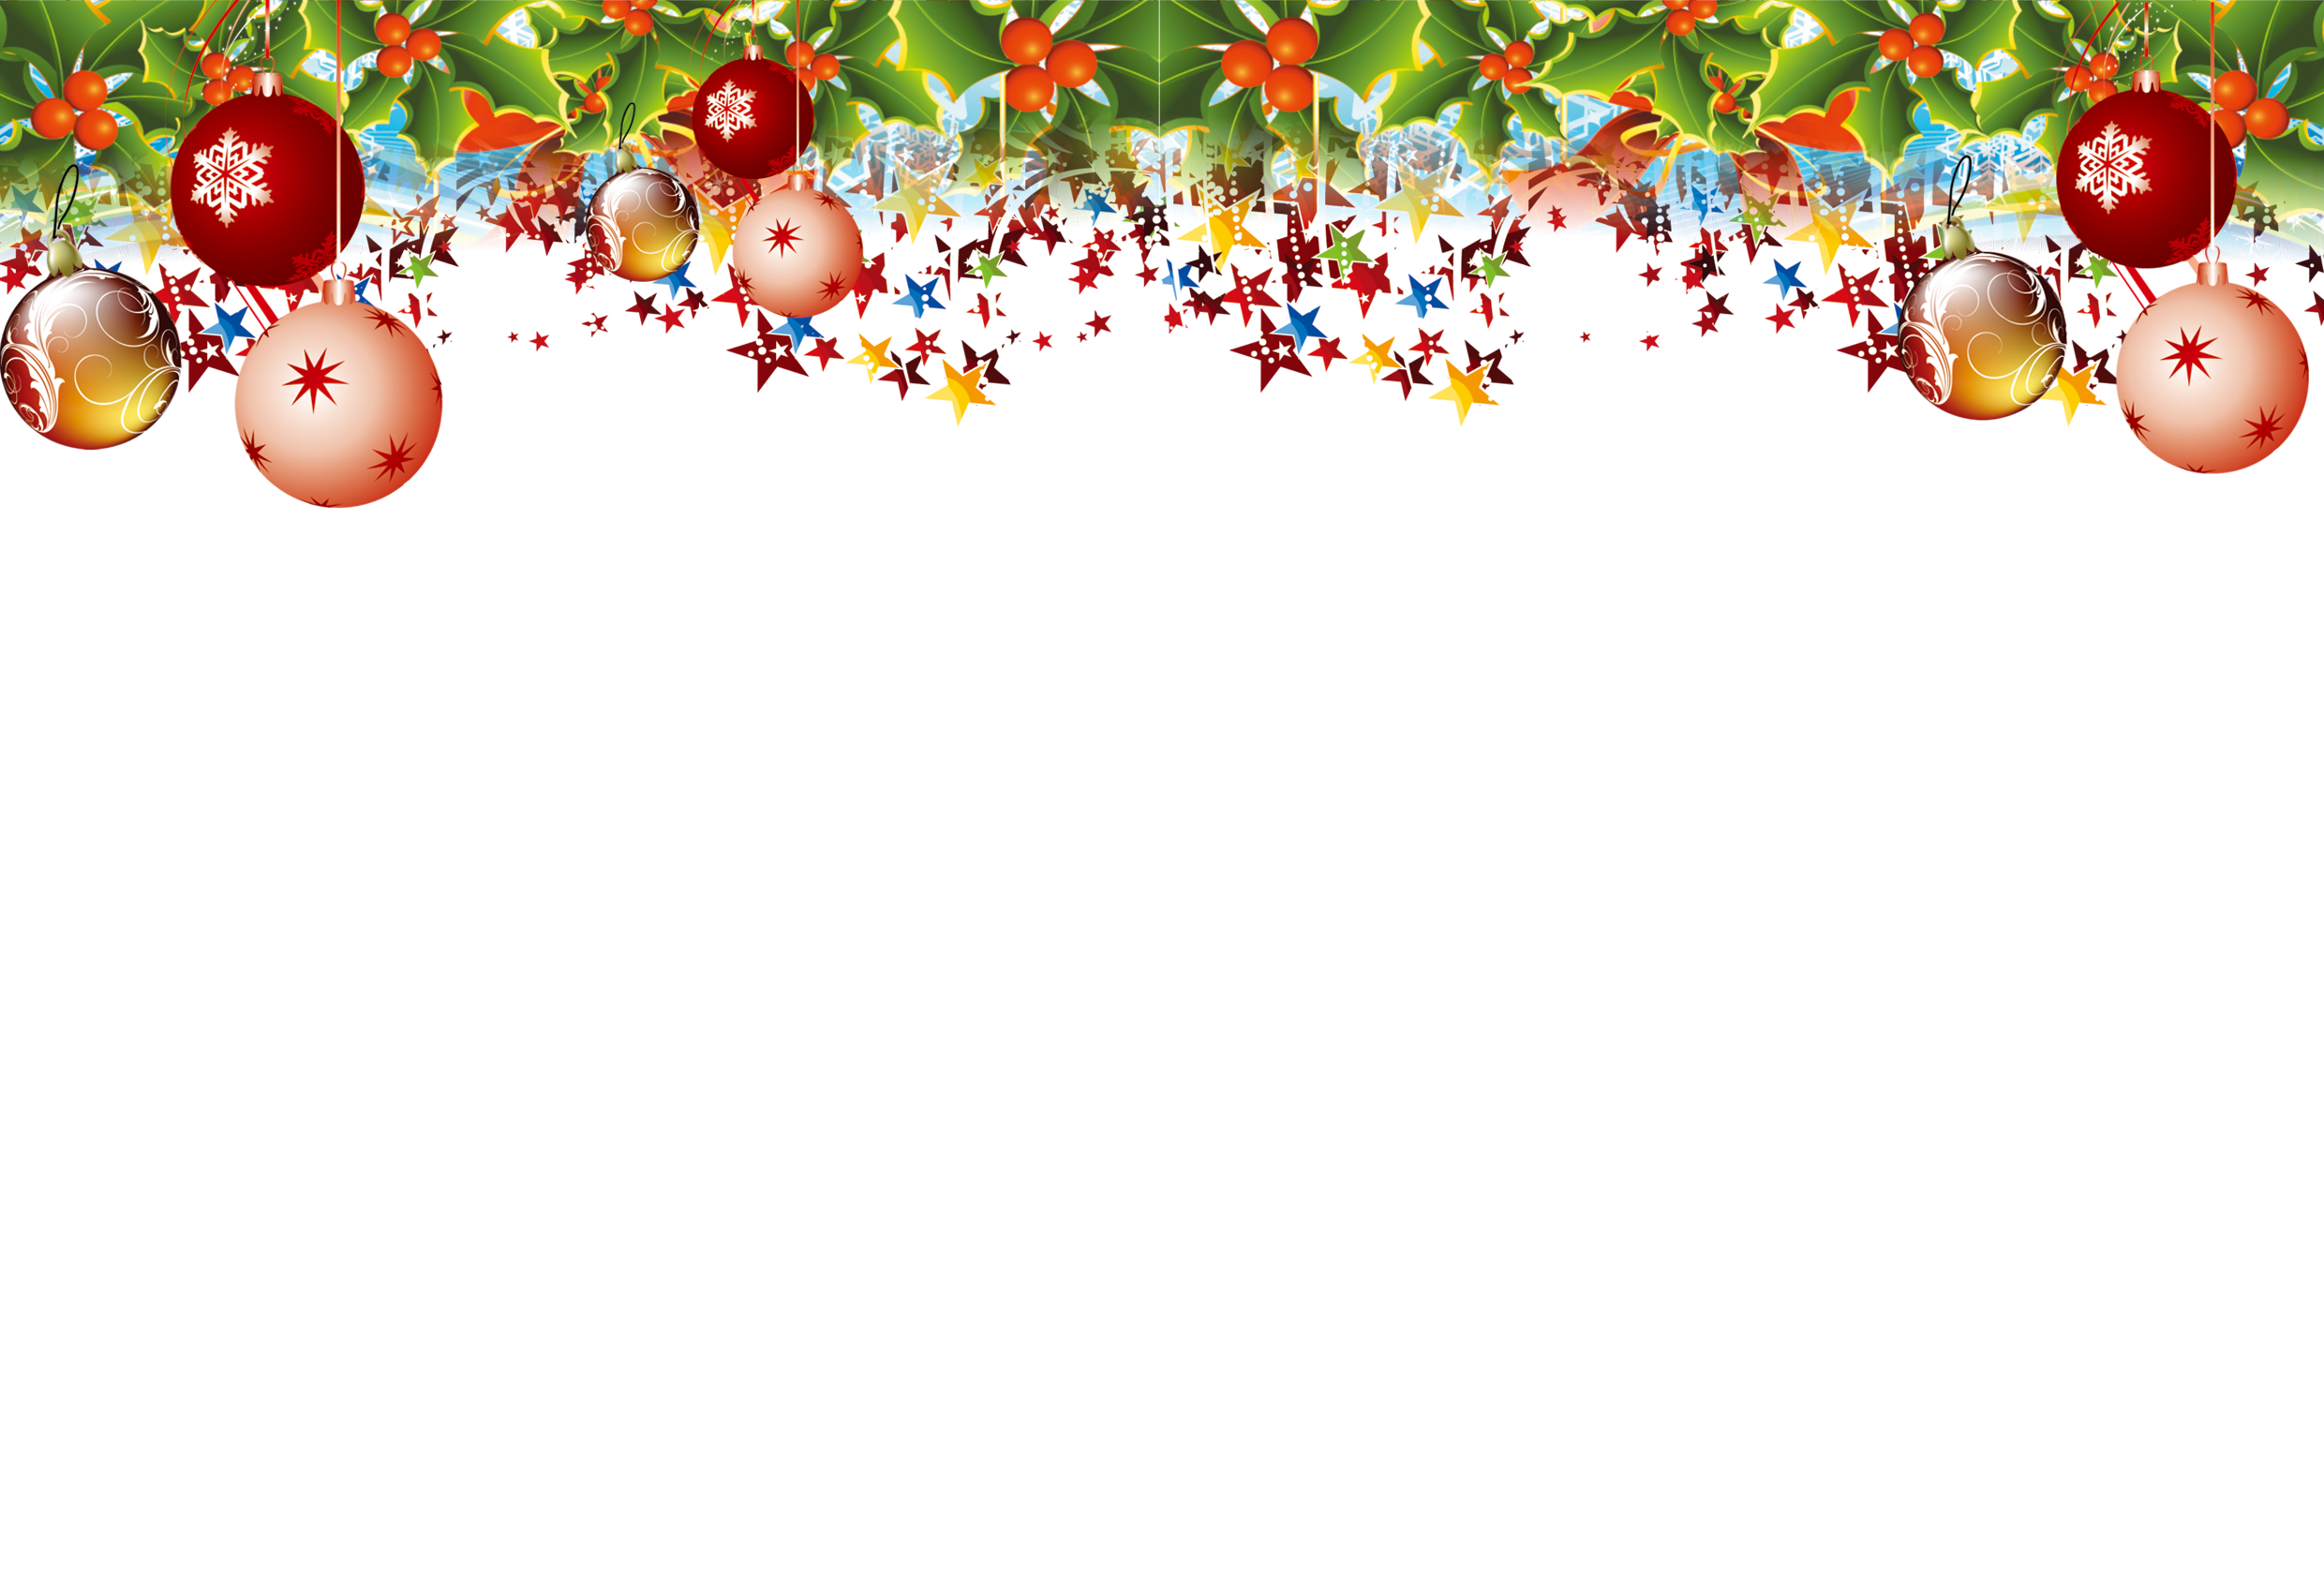 Pretty Christmas Background Png & Free Pretty Christmas Background.png Transparent Image